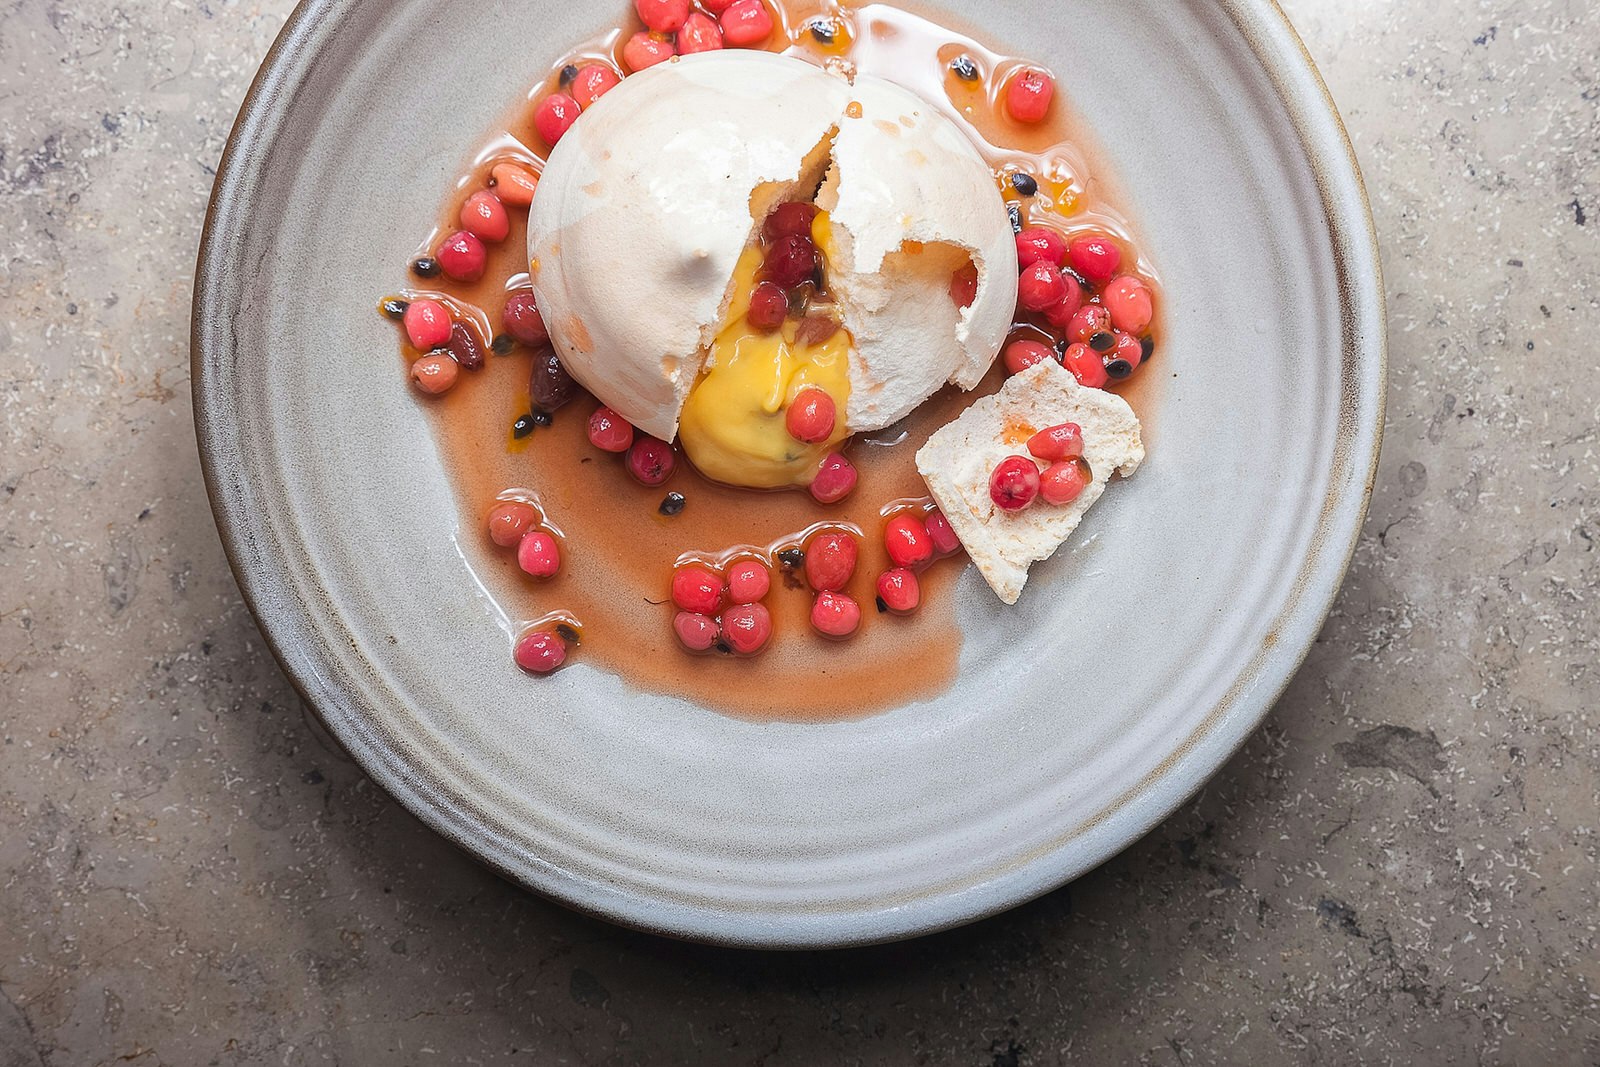 A saucy looking riberry and passion fruit pavlova from Harvest Newrybar with a passion fruit curd on an earthernware plate